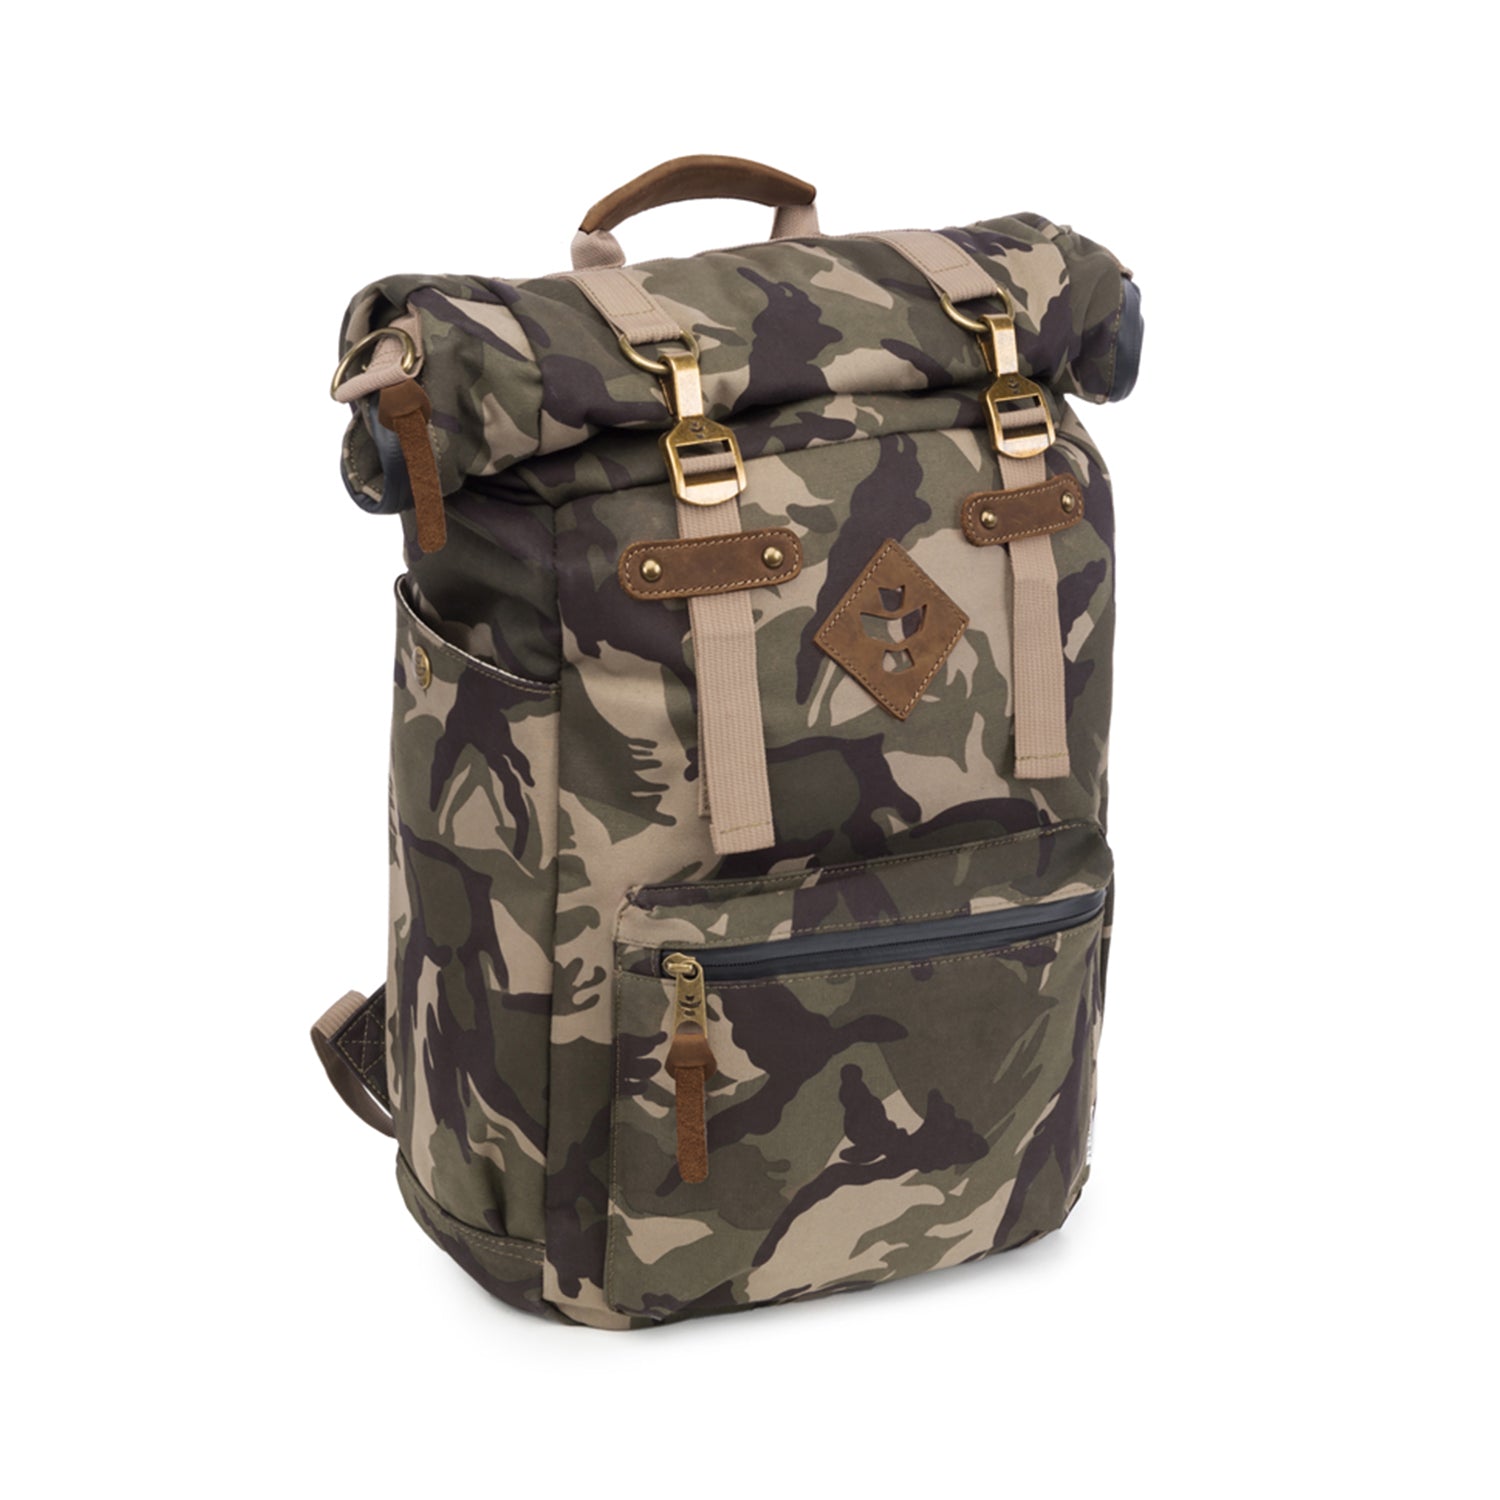 Camo Brown Canvas Smell Proof Water Resistant Rolltop Backpack Bag